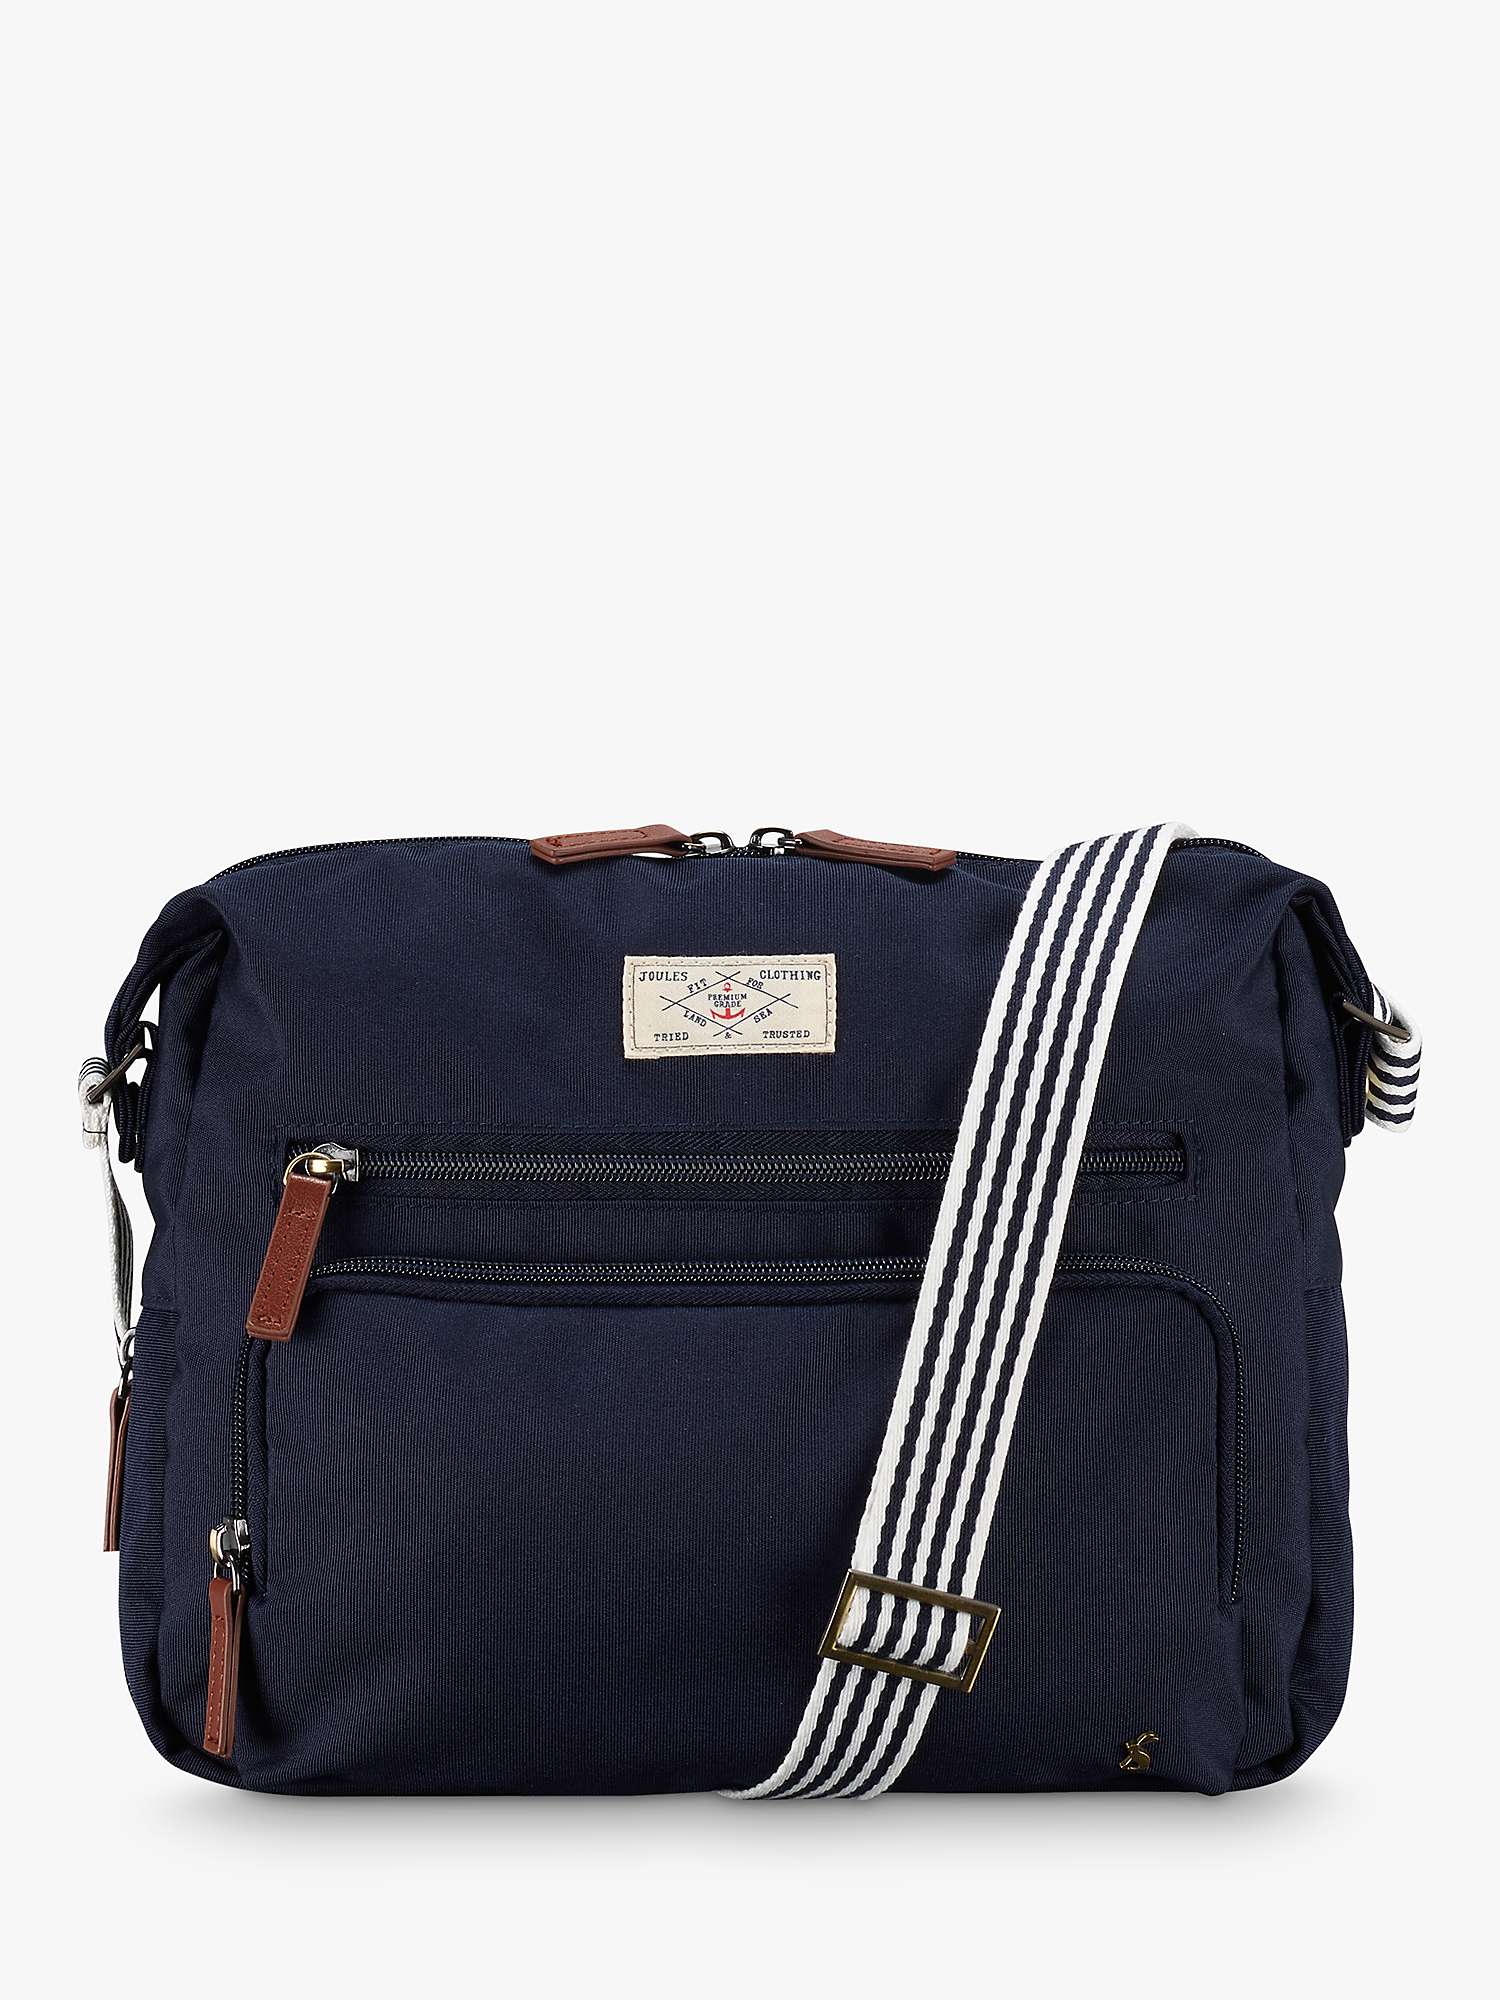 Joules Coast Collection Shoulder Bag, French Navy at John Lewis & Partners